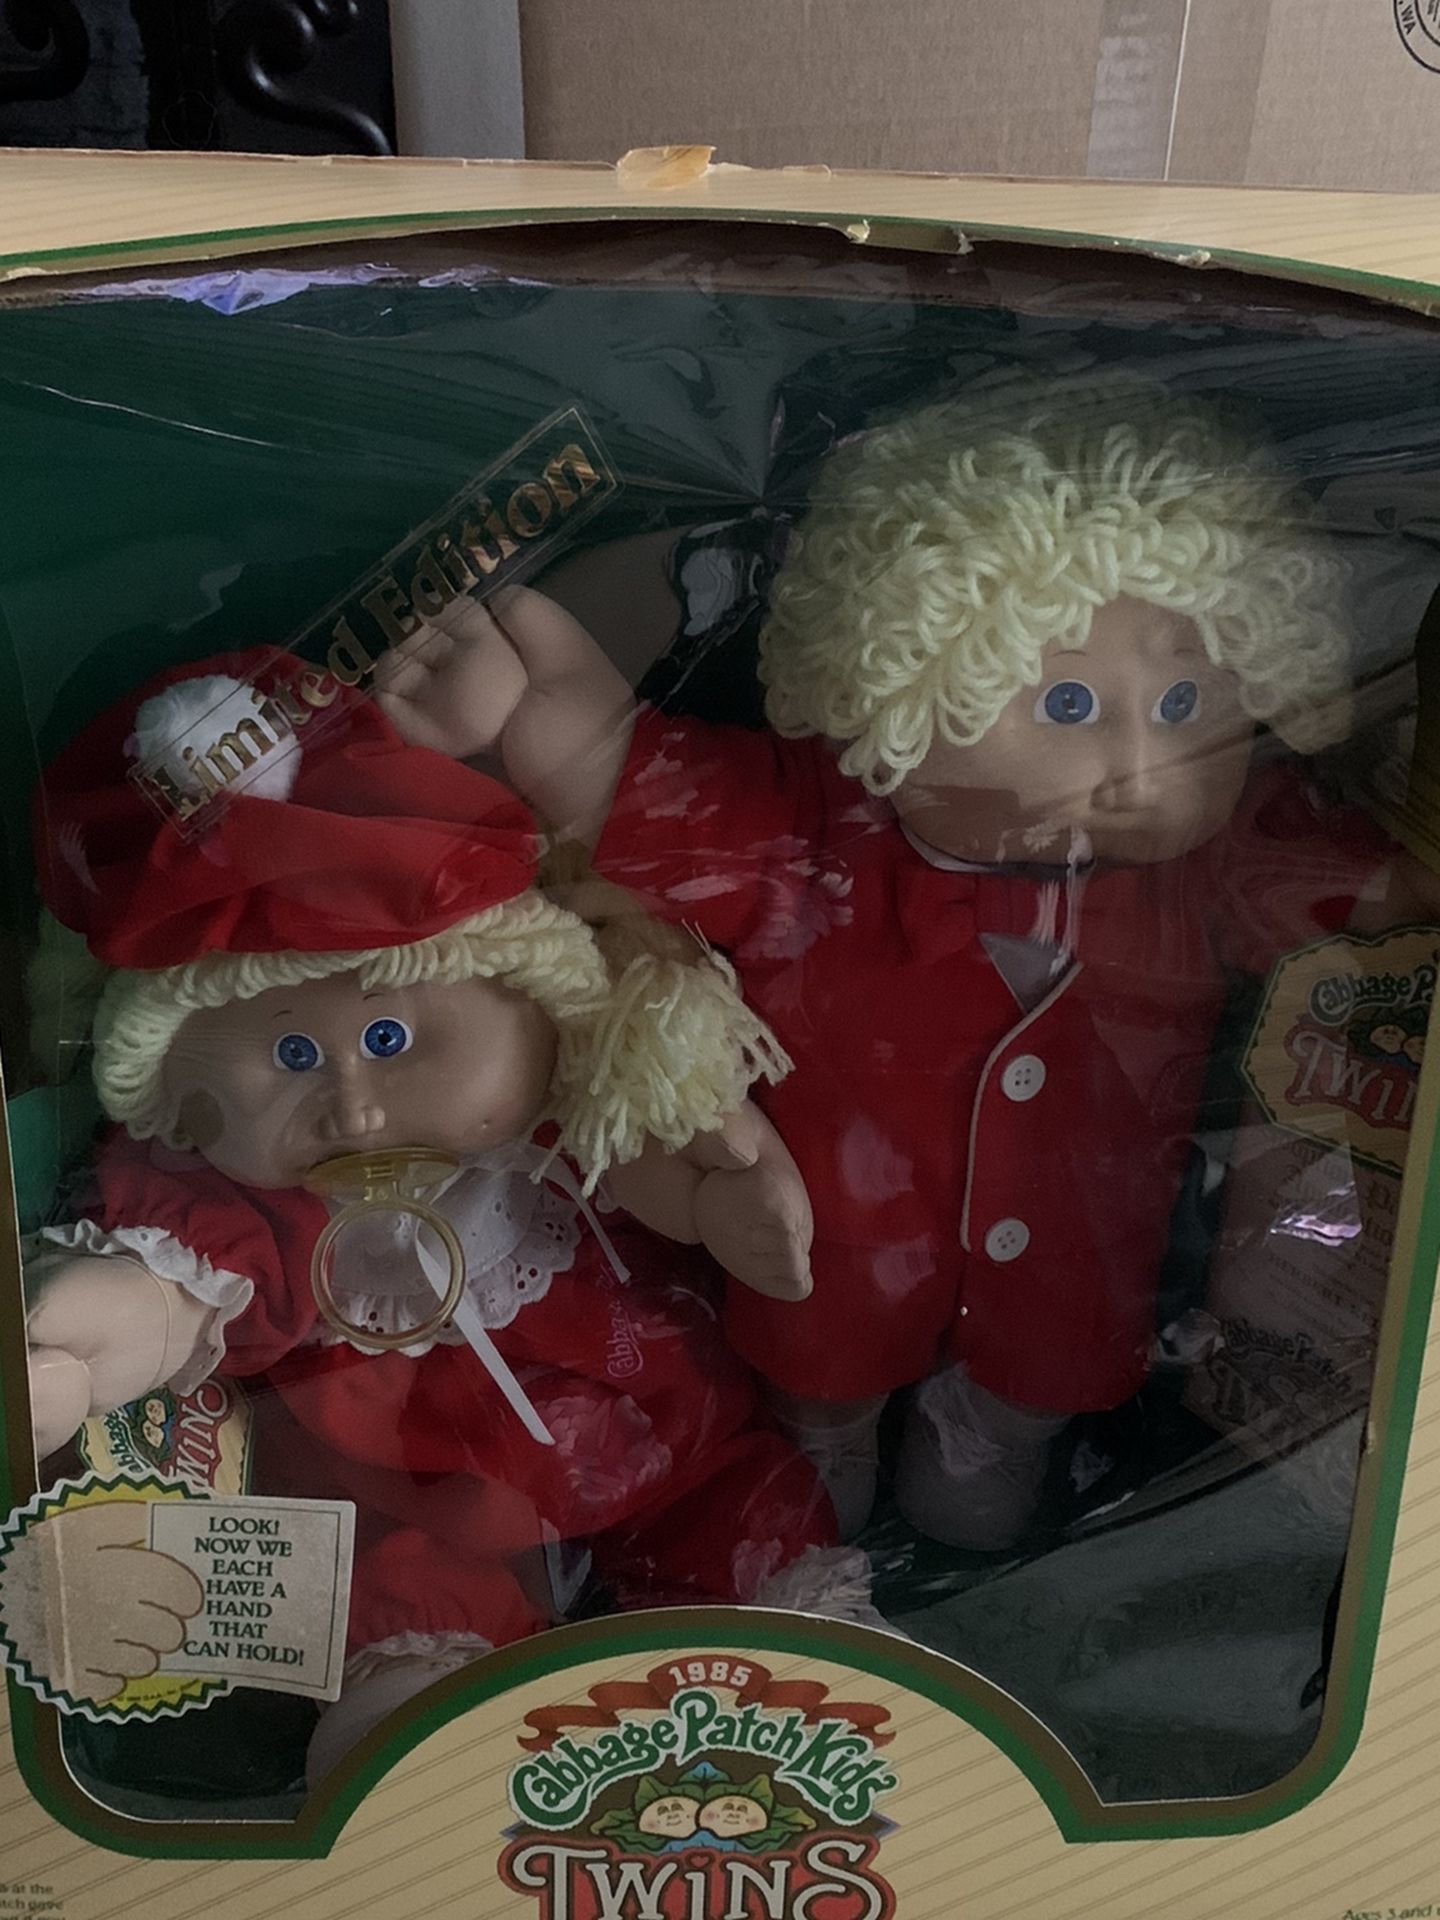 1985 Limited addition cabbage patch twin dolls